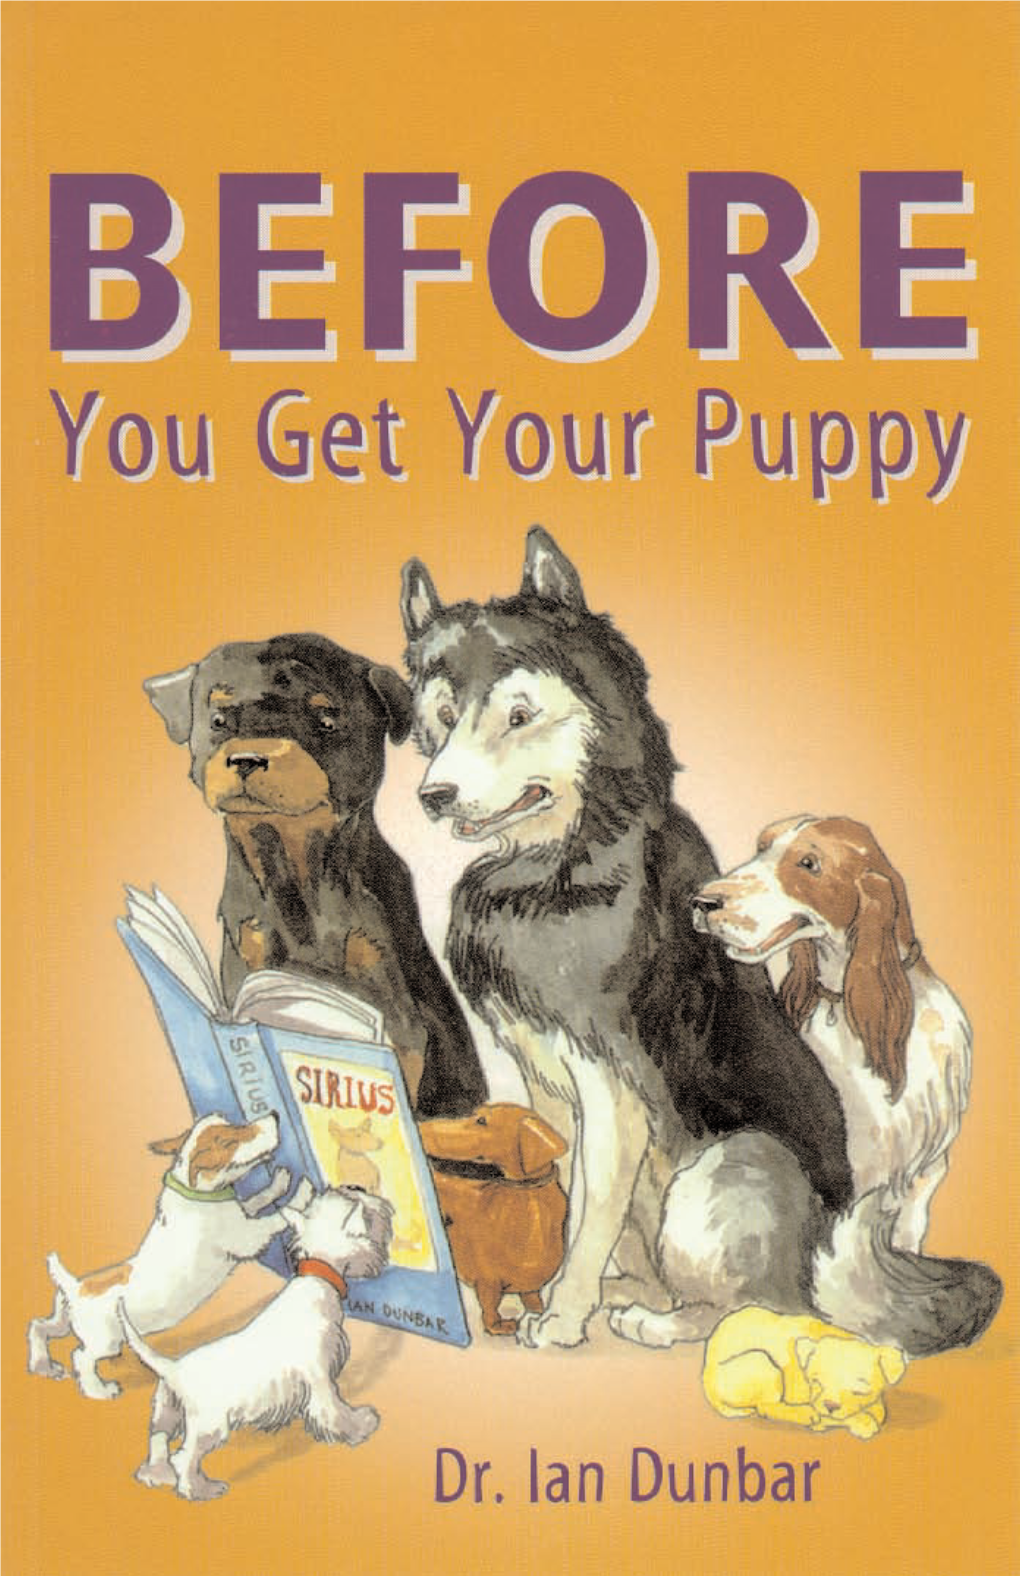 “Before You Get Your Puppy” by Ian Dunbar